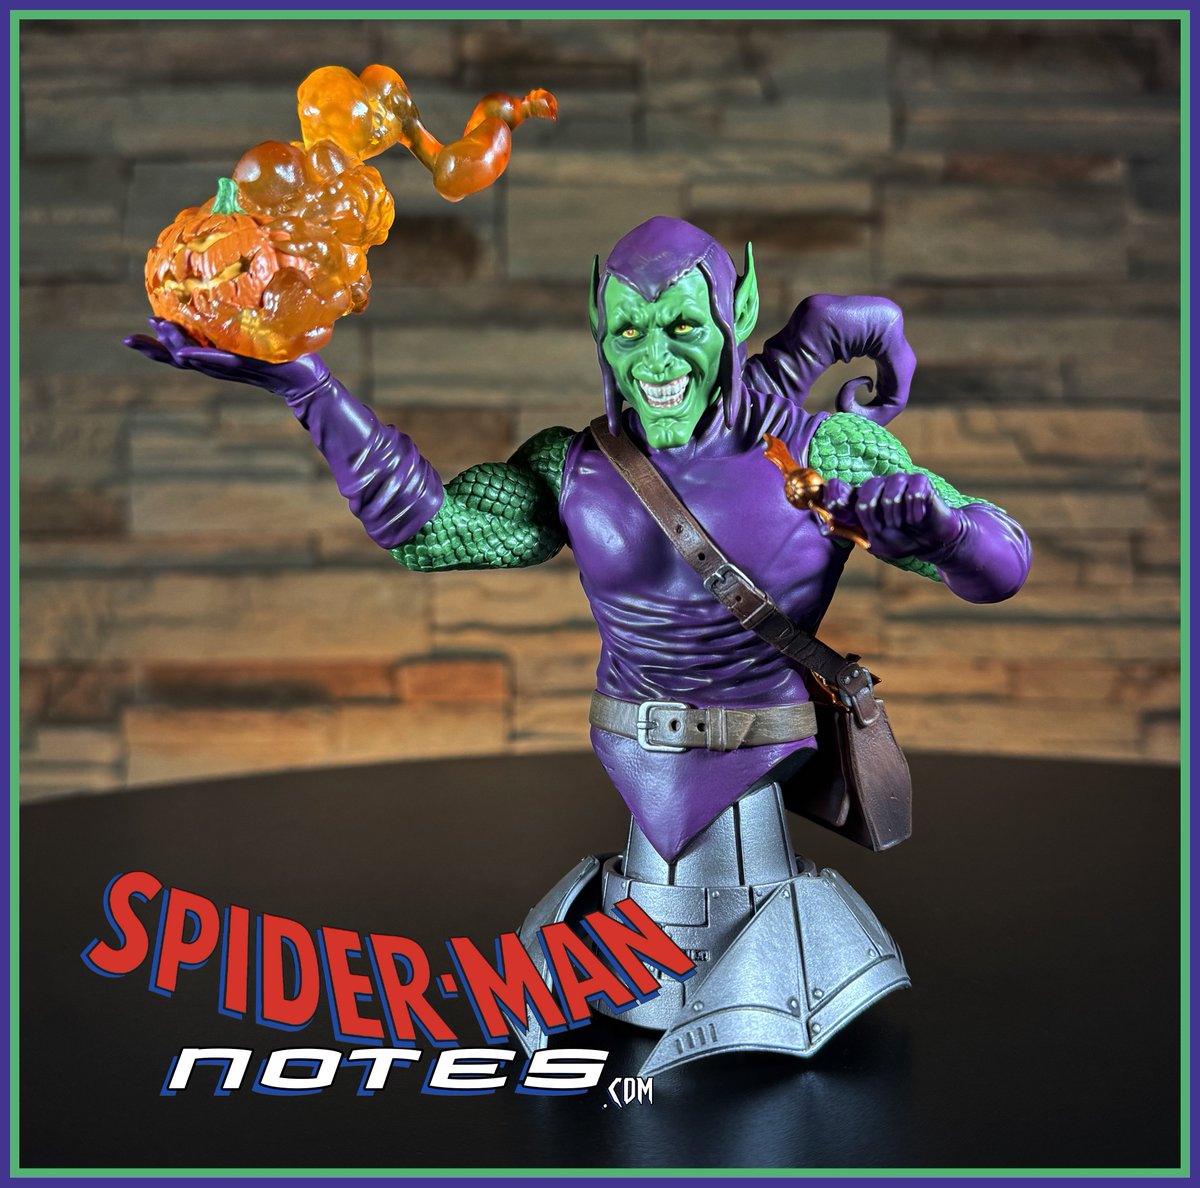 Video review dropping next week on the Spider-Man Notes YouTube page, but here’s a sneak peek 🫣 at the new Green Goblin bust from @CollectDST - Scary cool 🕸️🕷️

#SpiderMan #GreenGoblin #DiamondSelectToys